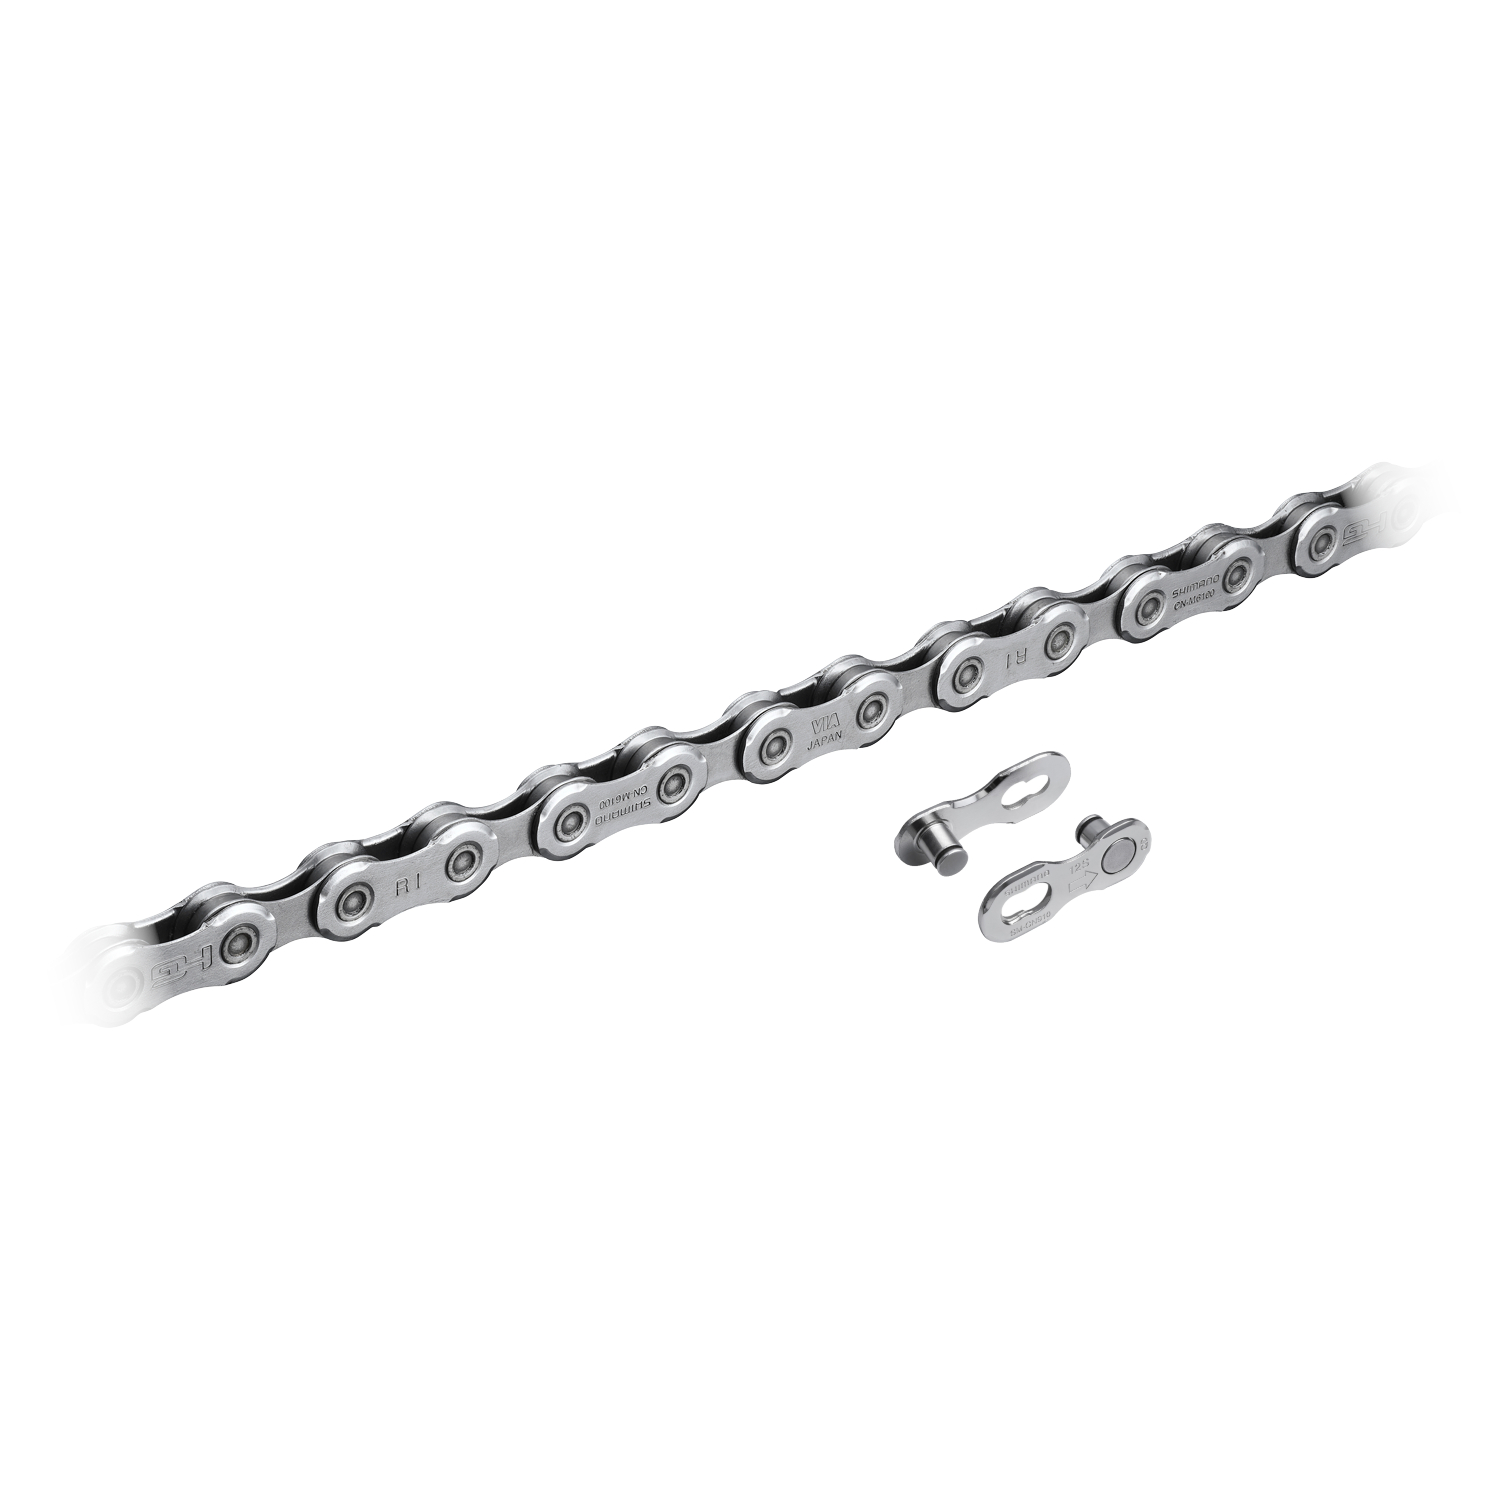 Picture of Shimano Deore CN-M6100 Chain 12-speed - with Quick Link - 126 Links